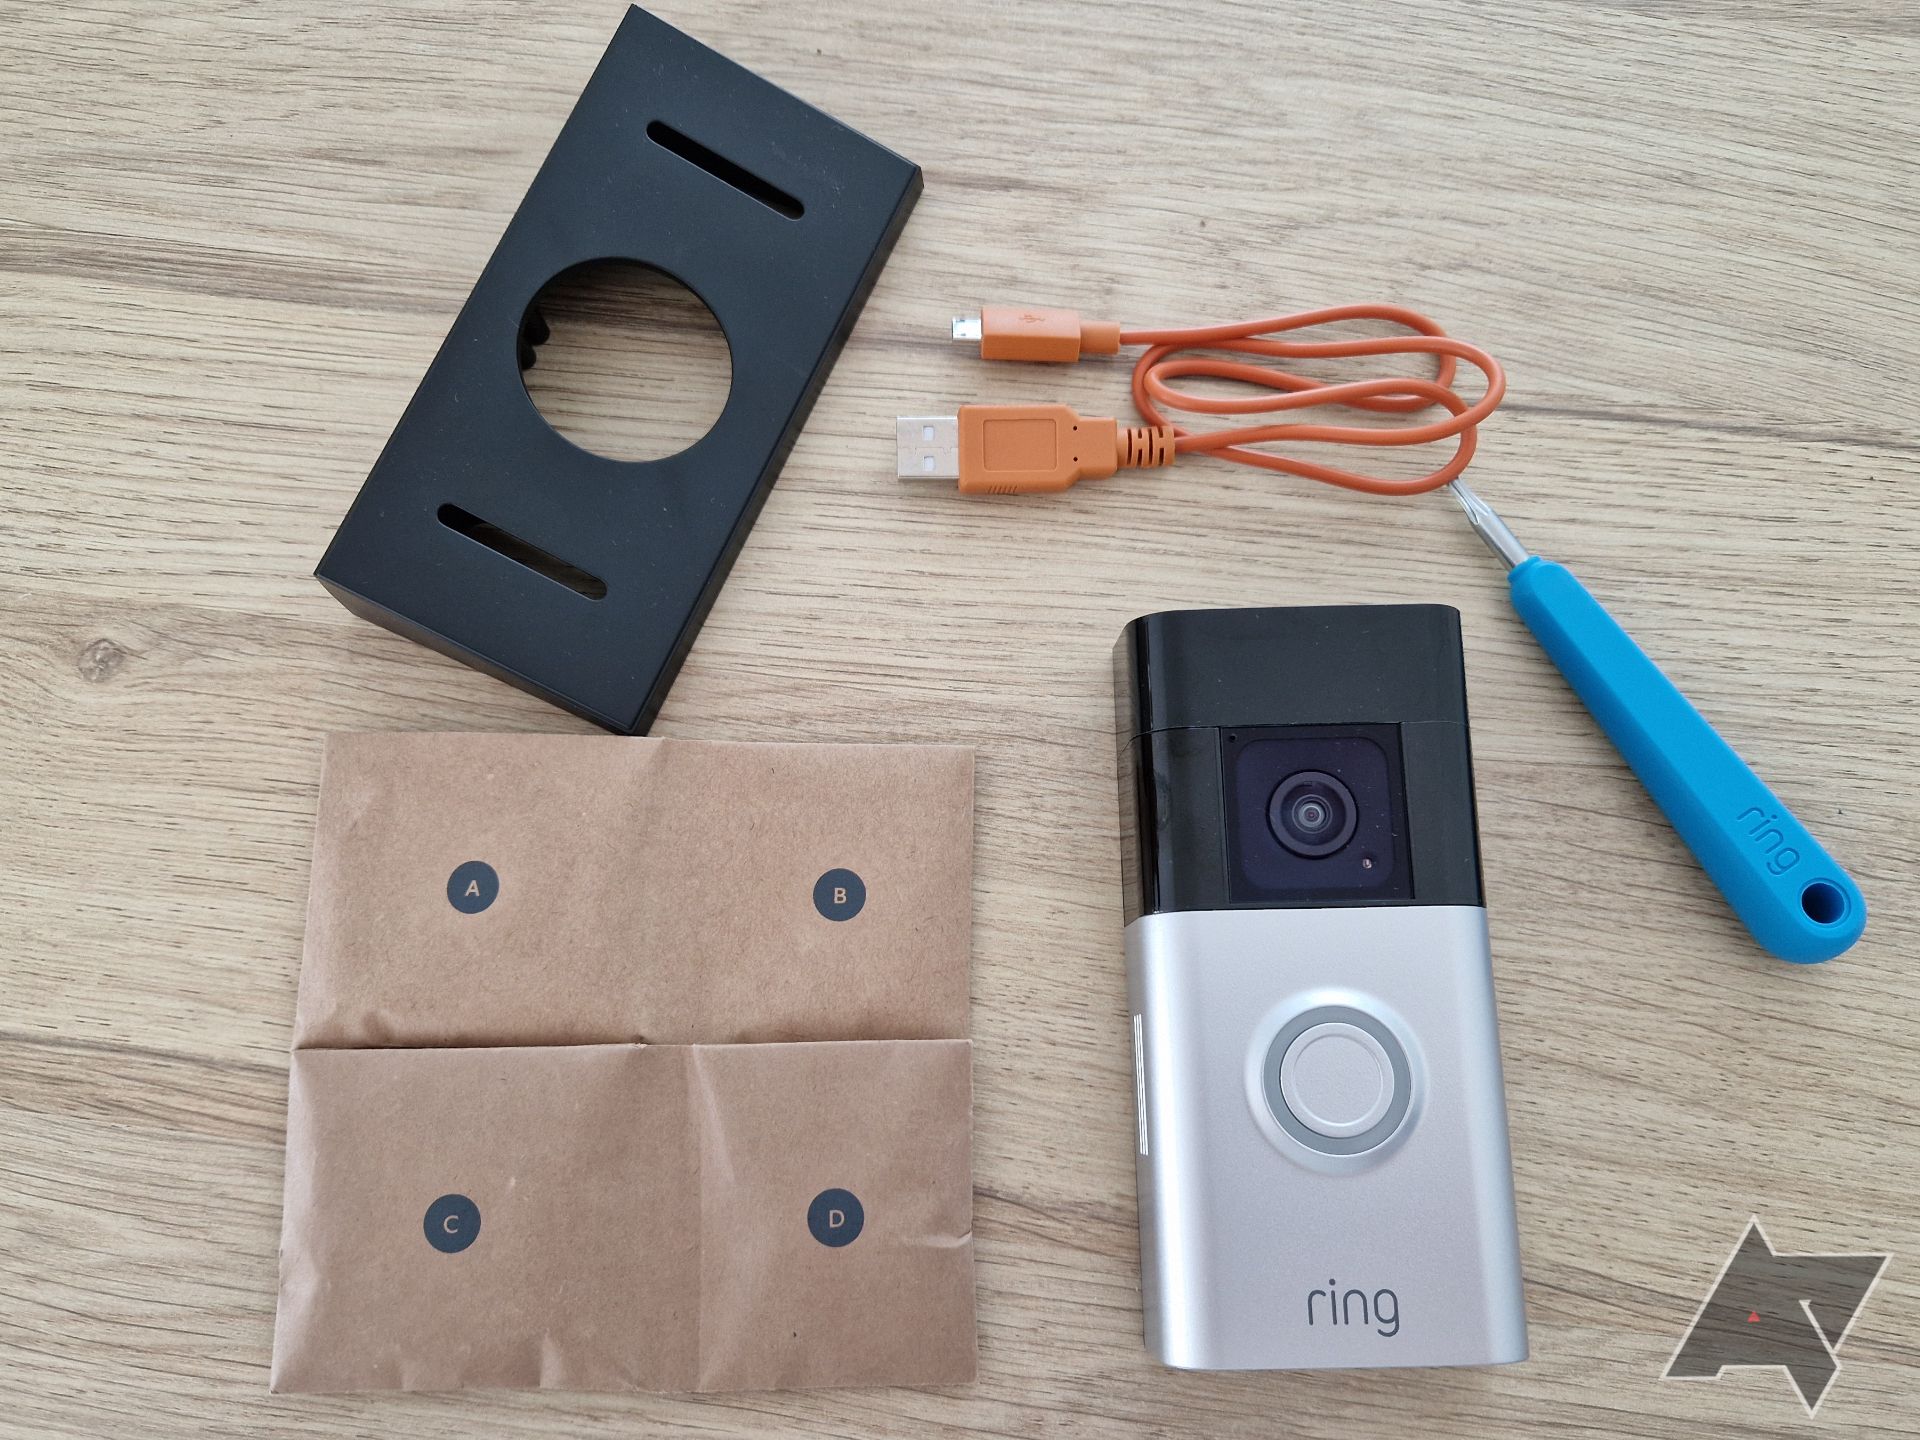 Ring Battery Doorbell Plus review: Improved from head to toe